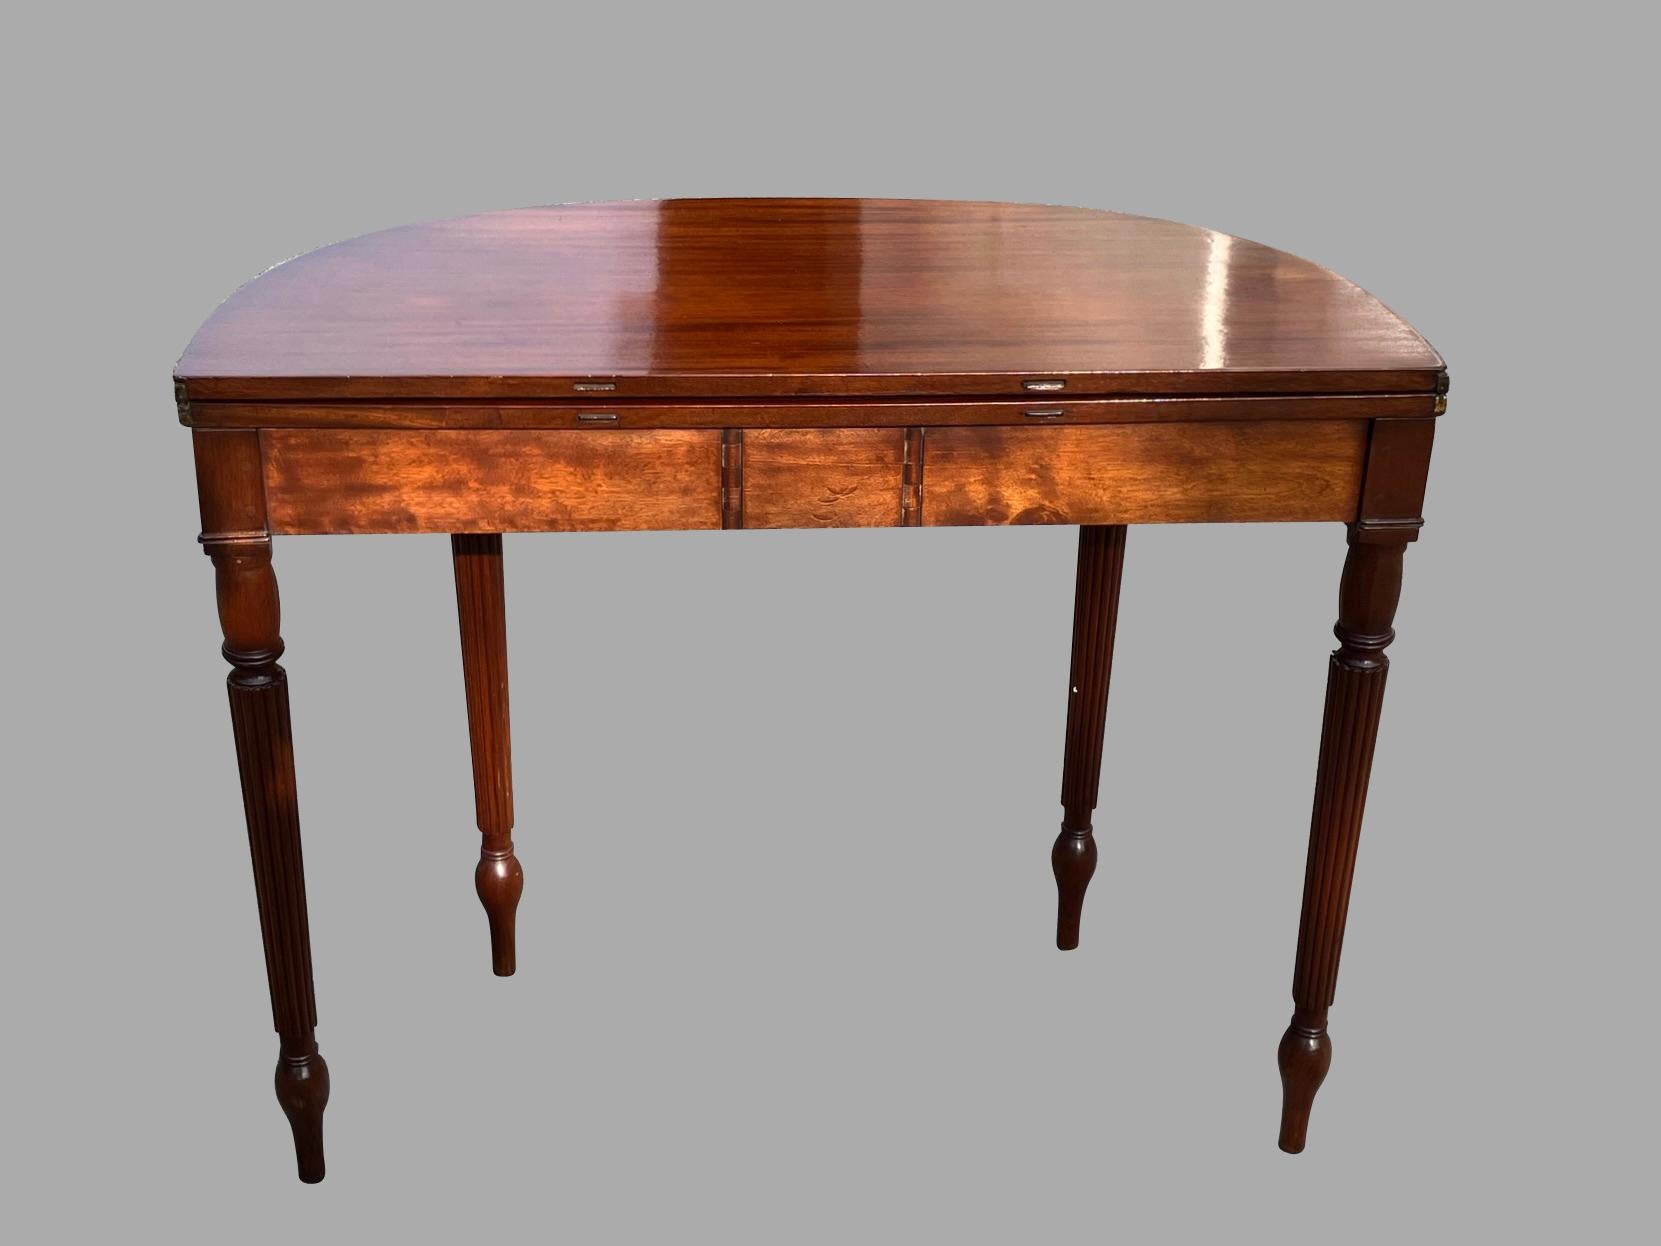 English Regency Period Mahogany Flip Top Game or Tea Table with Reeded Legs For Sale 7